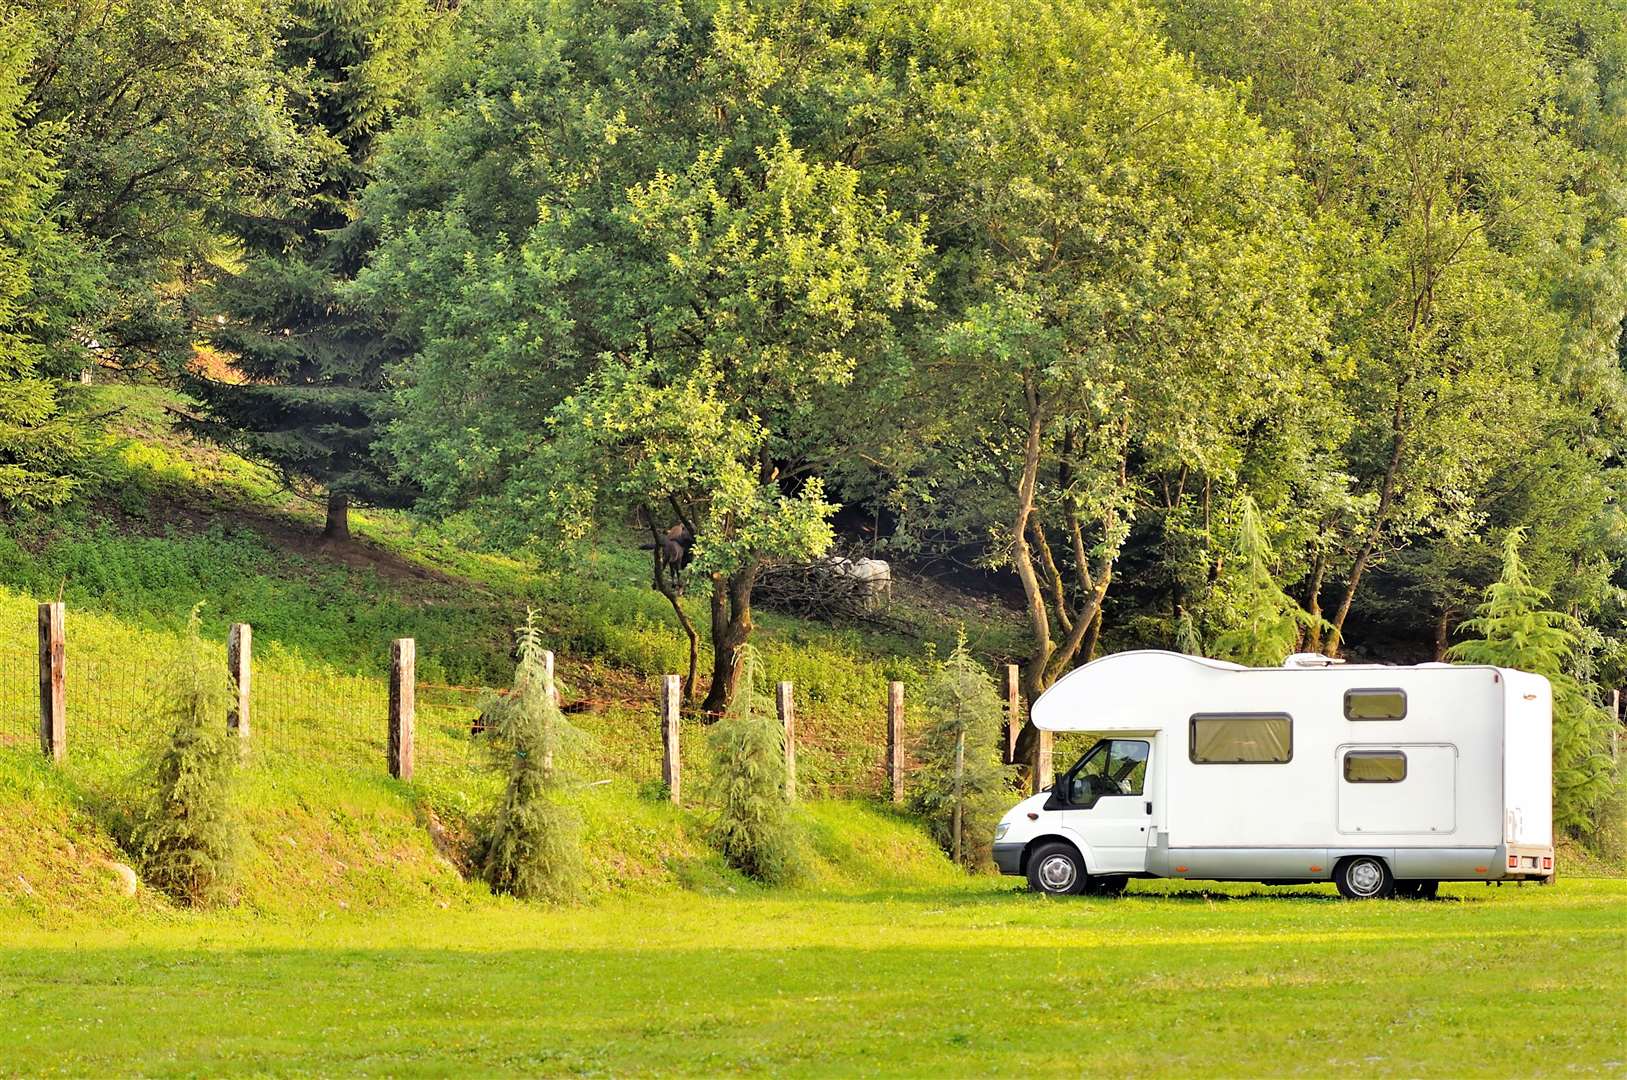 The authority has created a landowner guide to create temporary motorhome stopovers.